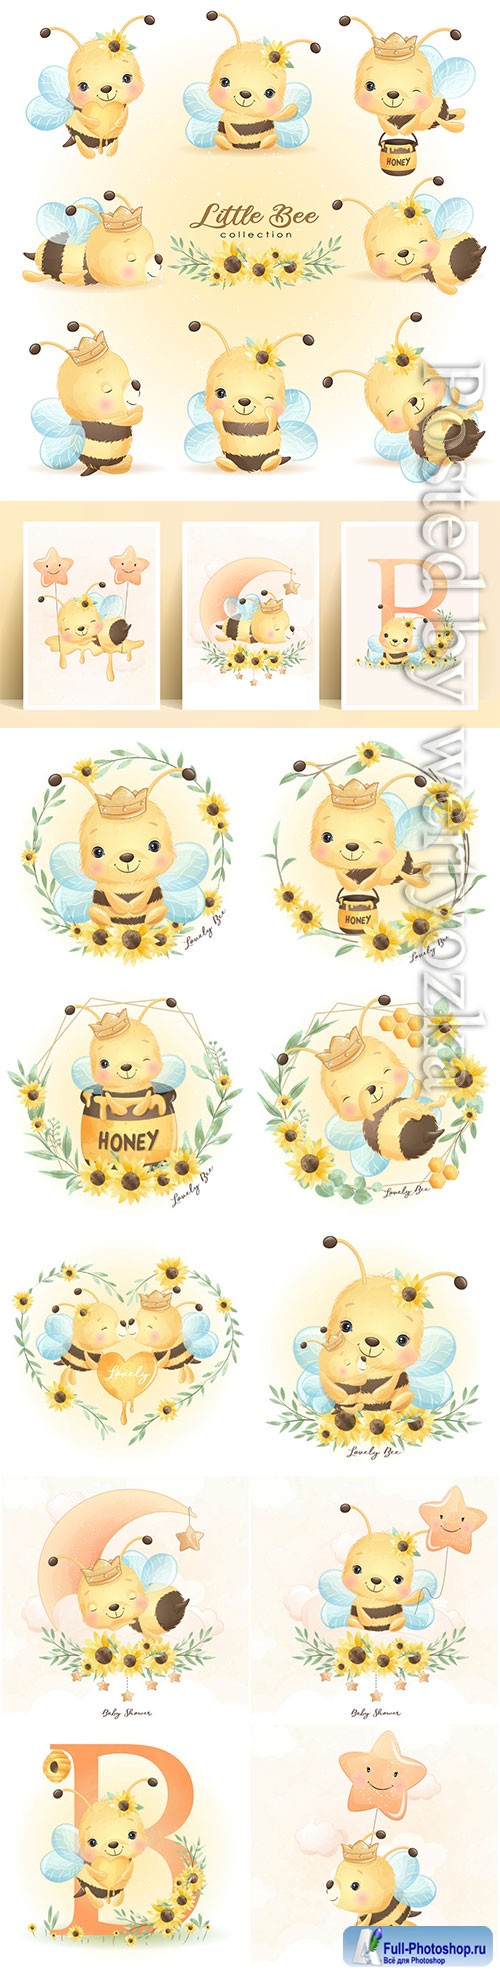 Cute doodle bee poses with floral collection premium vector